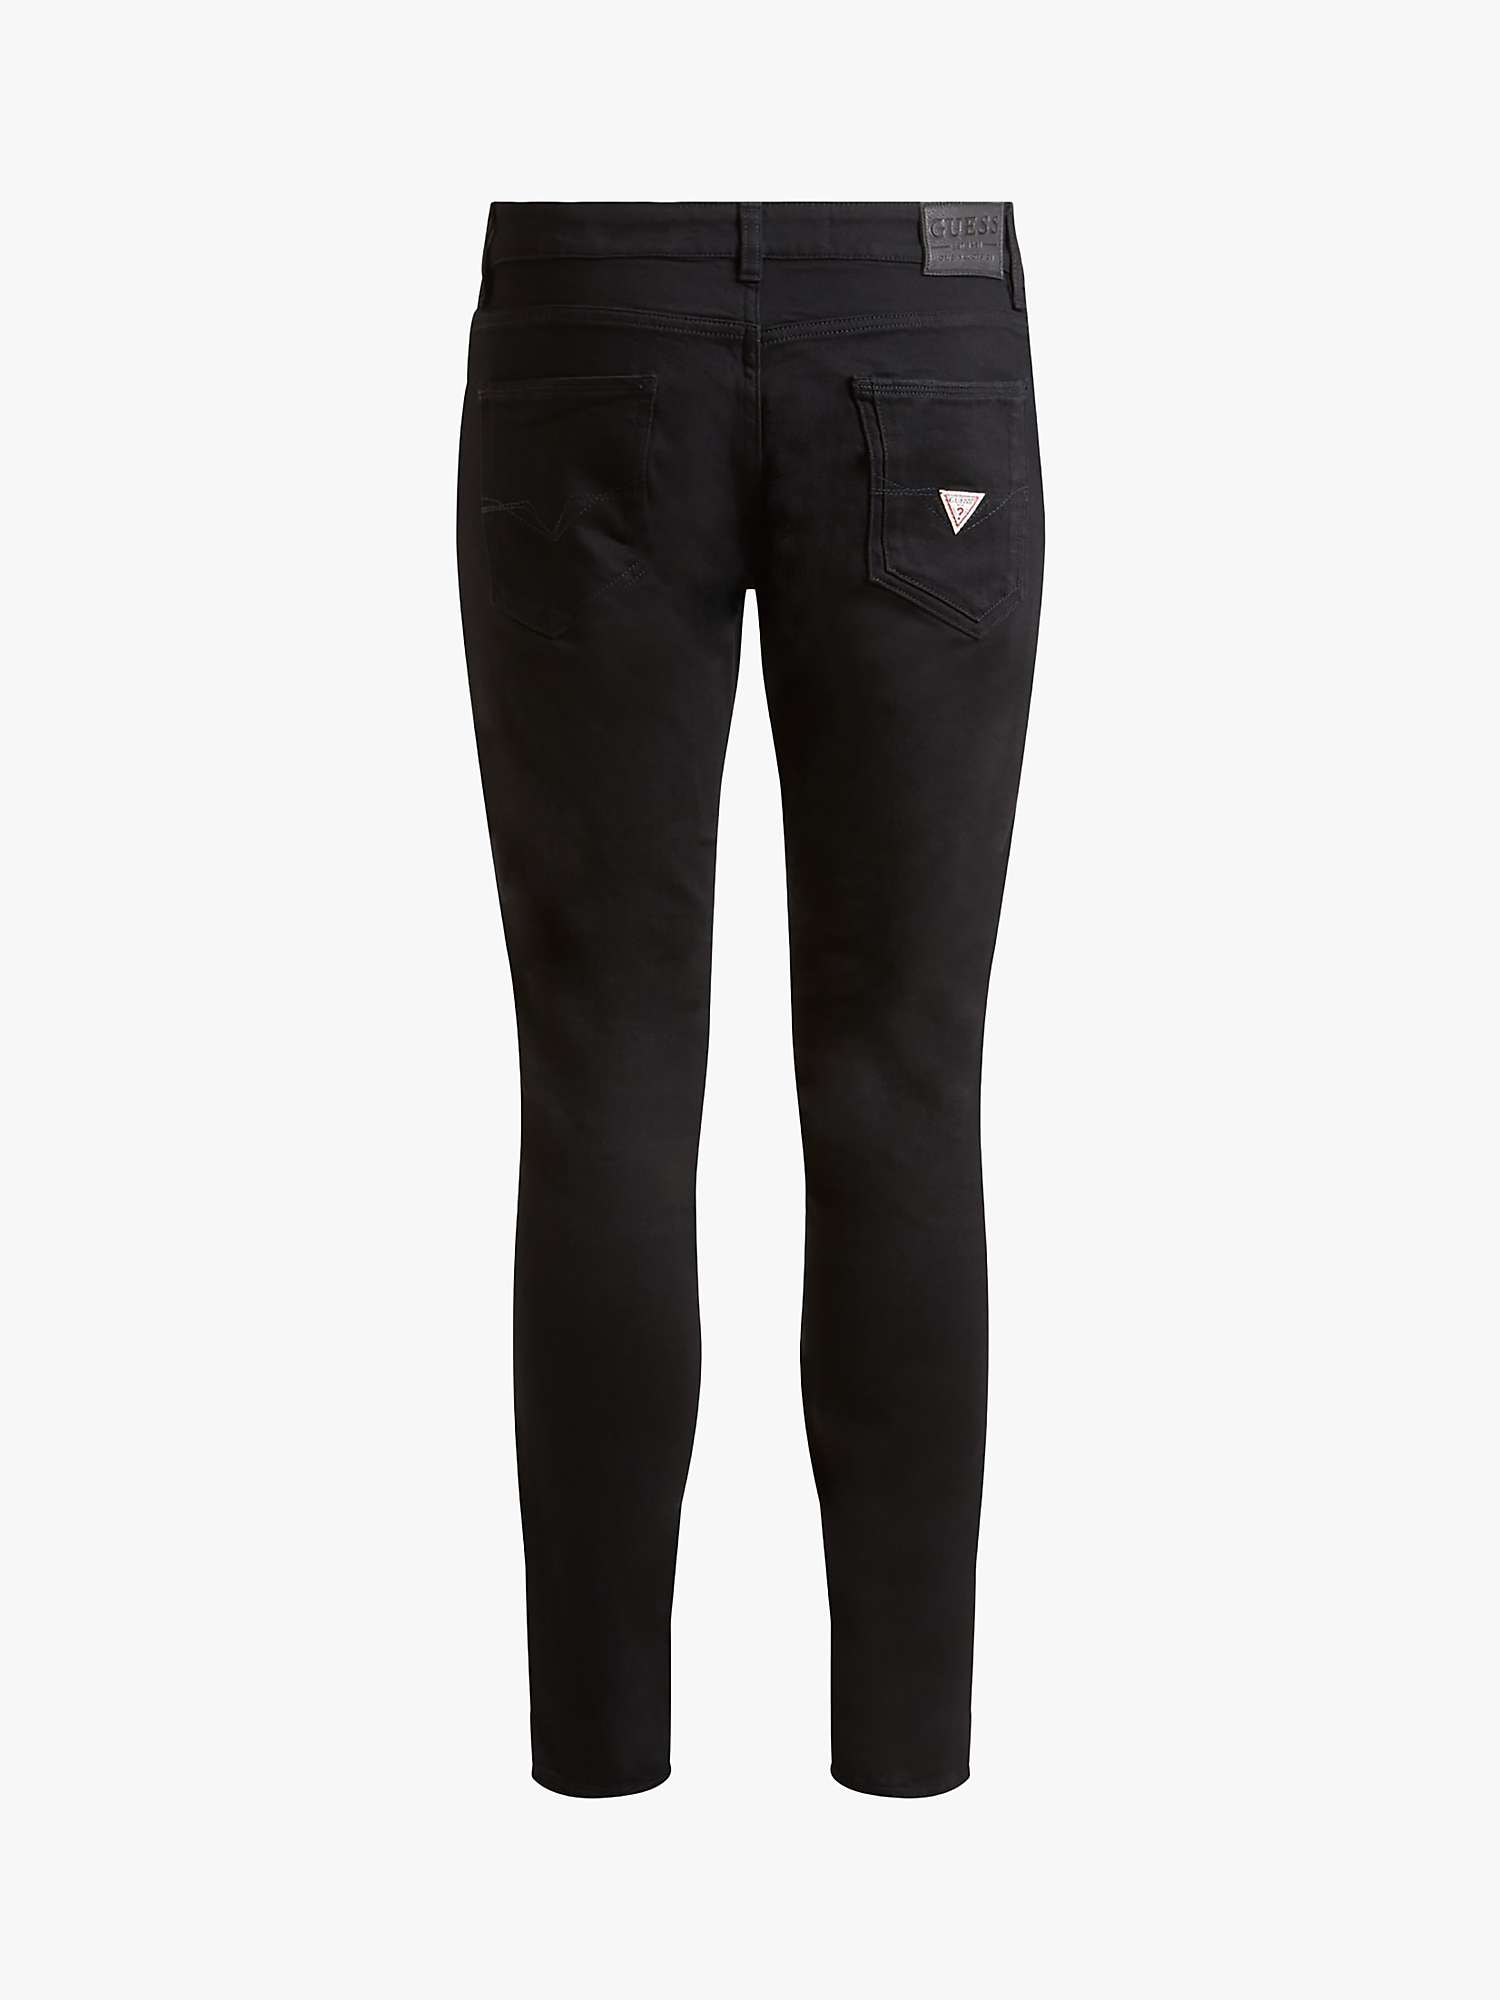 Buy GUESS Miami Skinny Fit Jeans, Carry Black Online at johnlewis.com